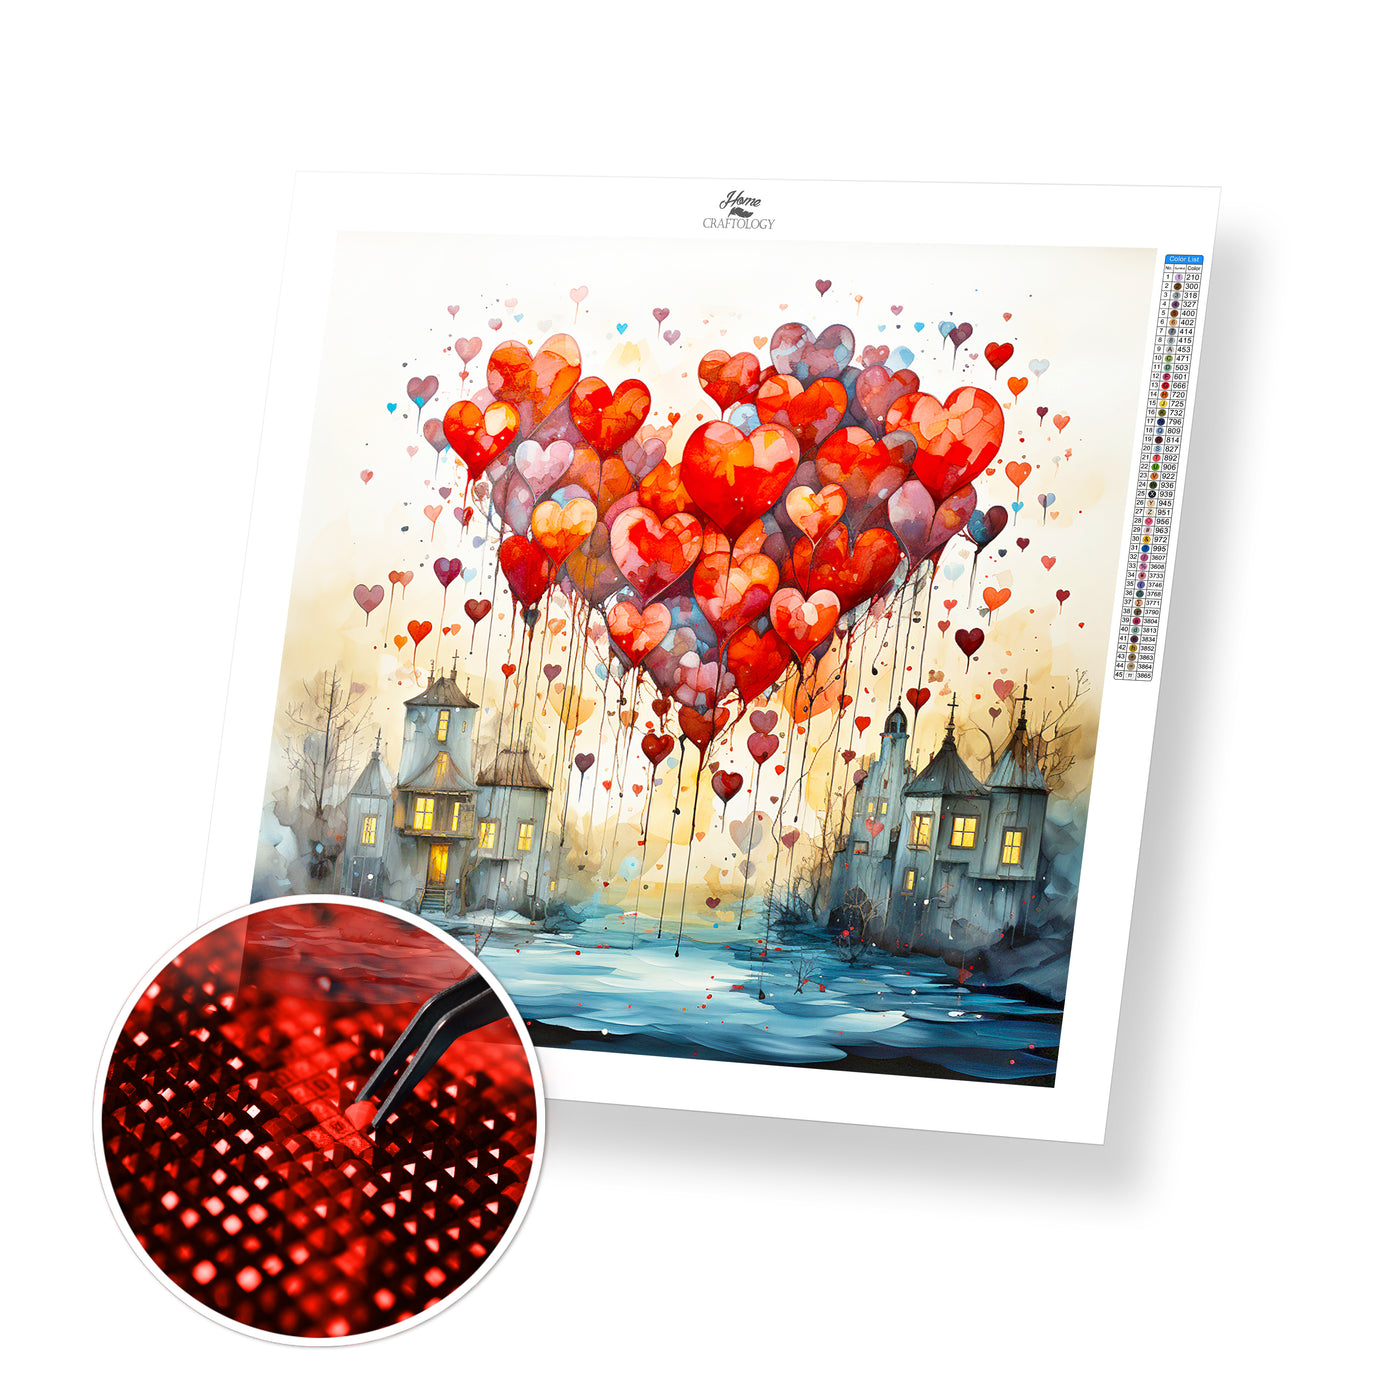 New! Love in a Hopeless Place - Premium Diamond Painting Kit